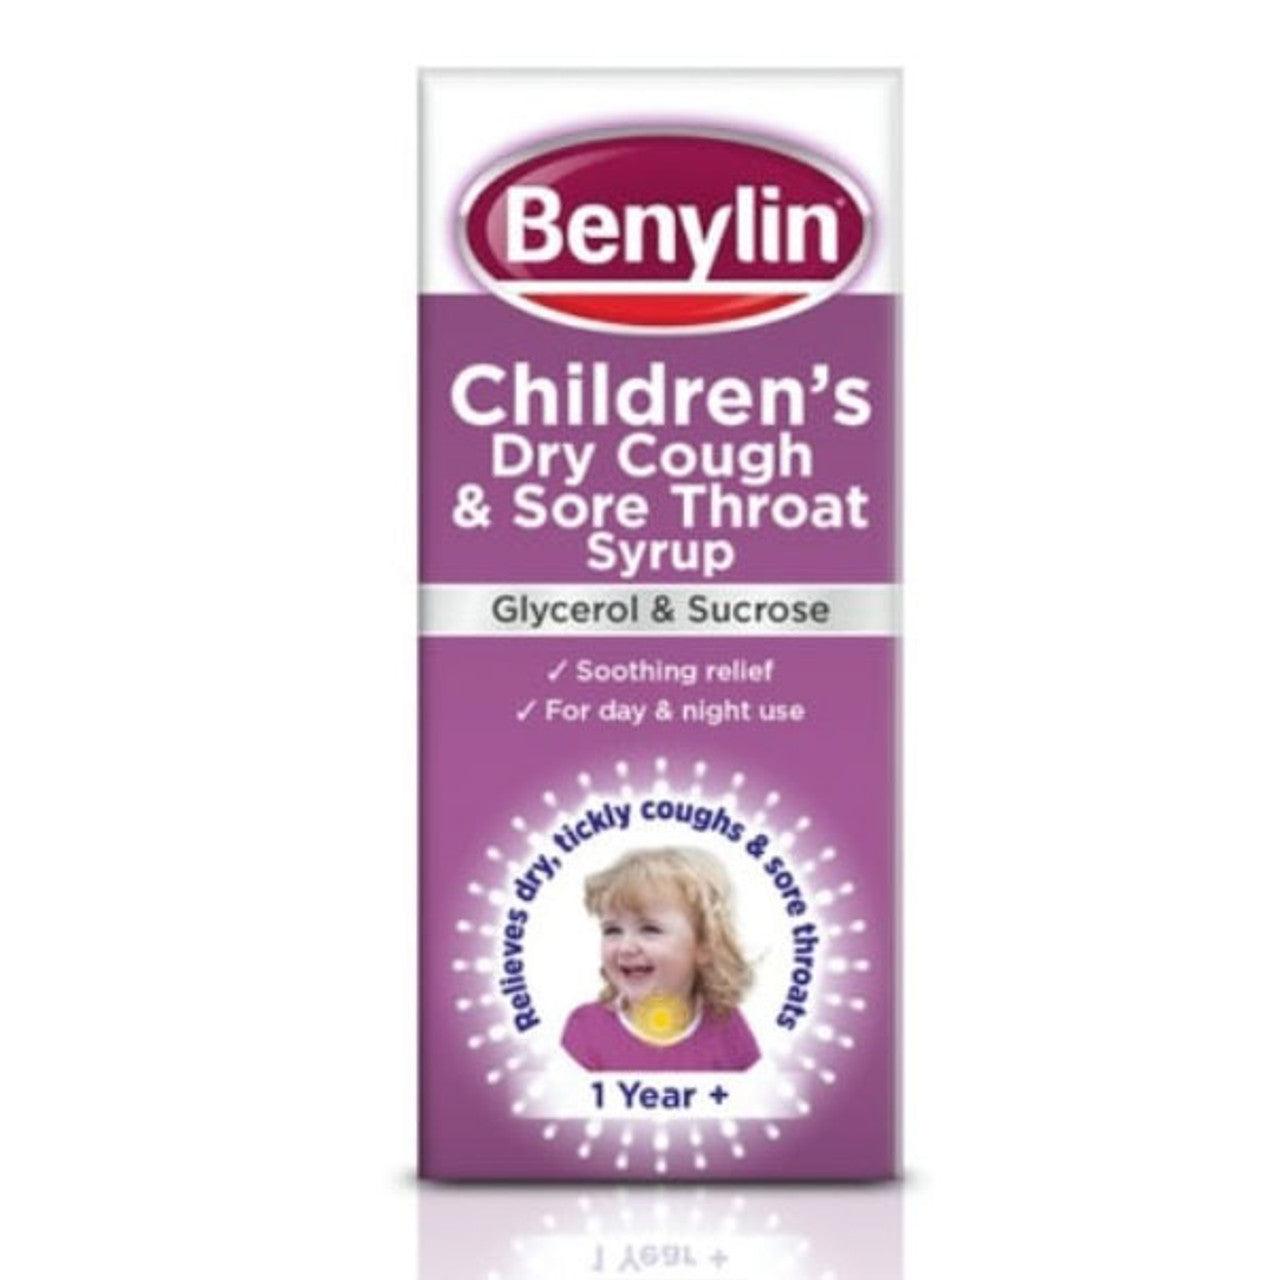 Benylin Children's Dry Cough & Sore Throat Syrup - Rightangled